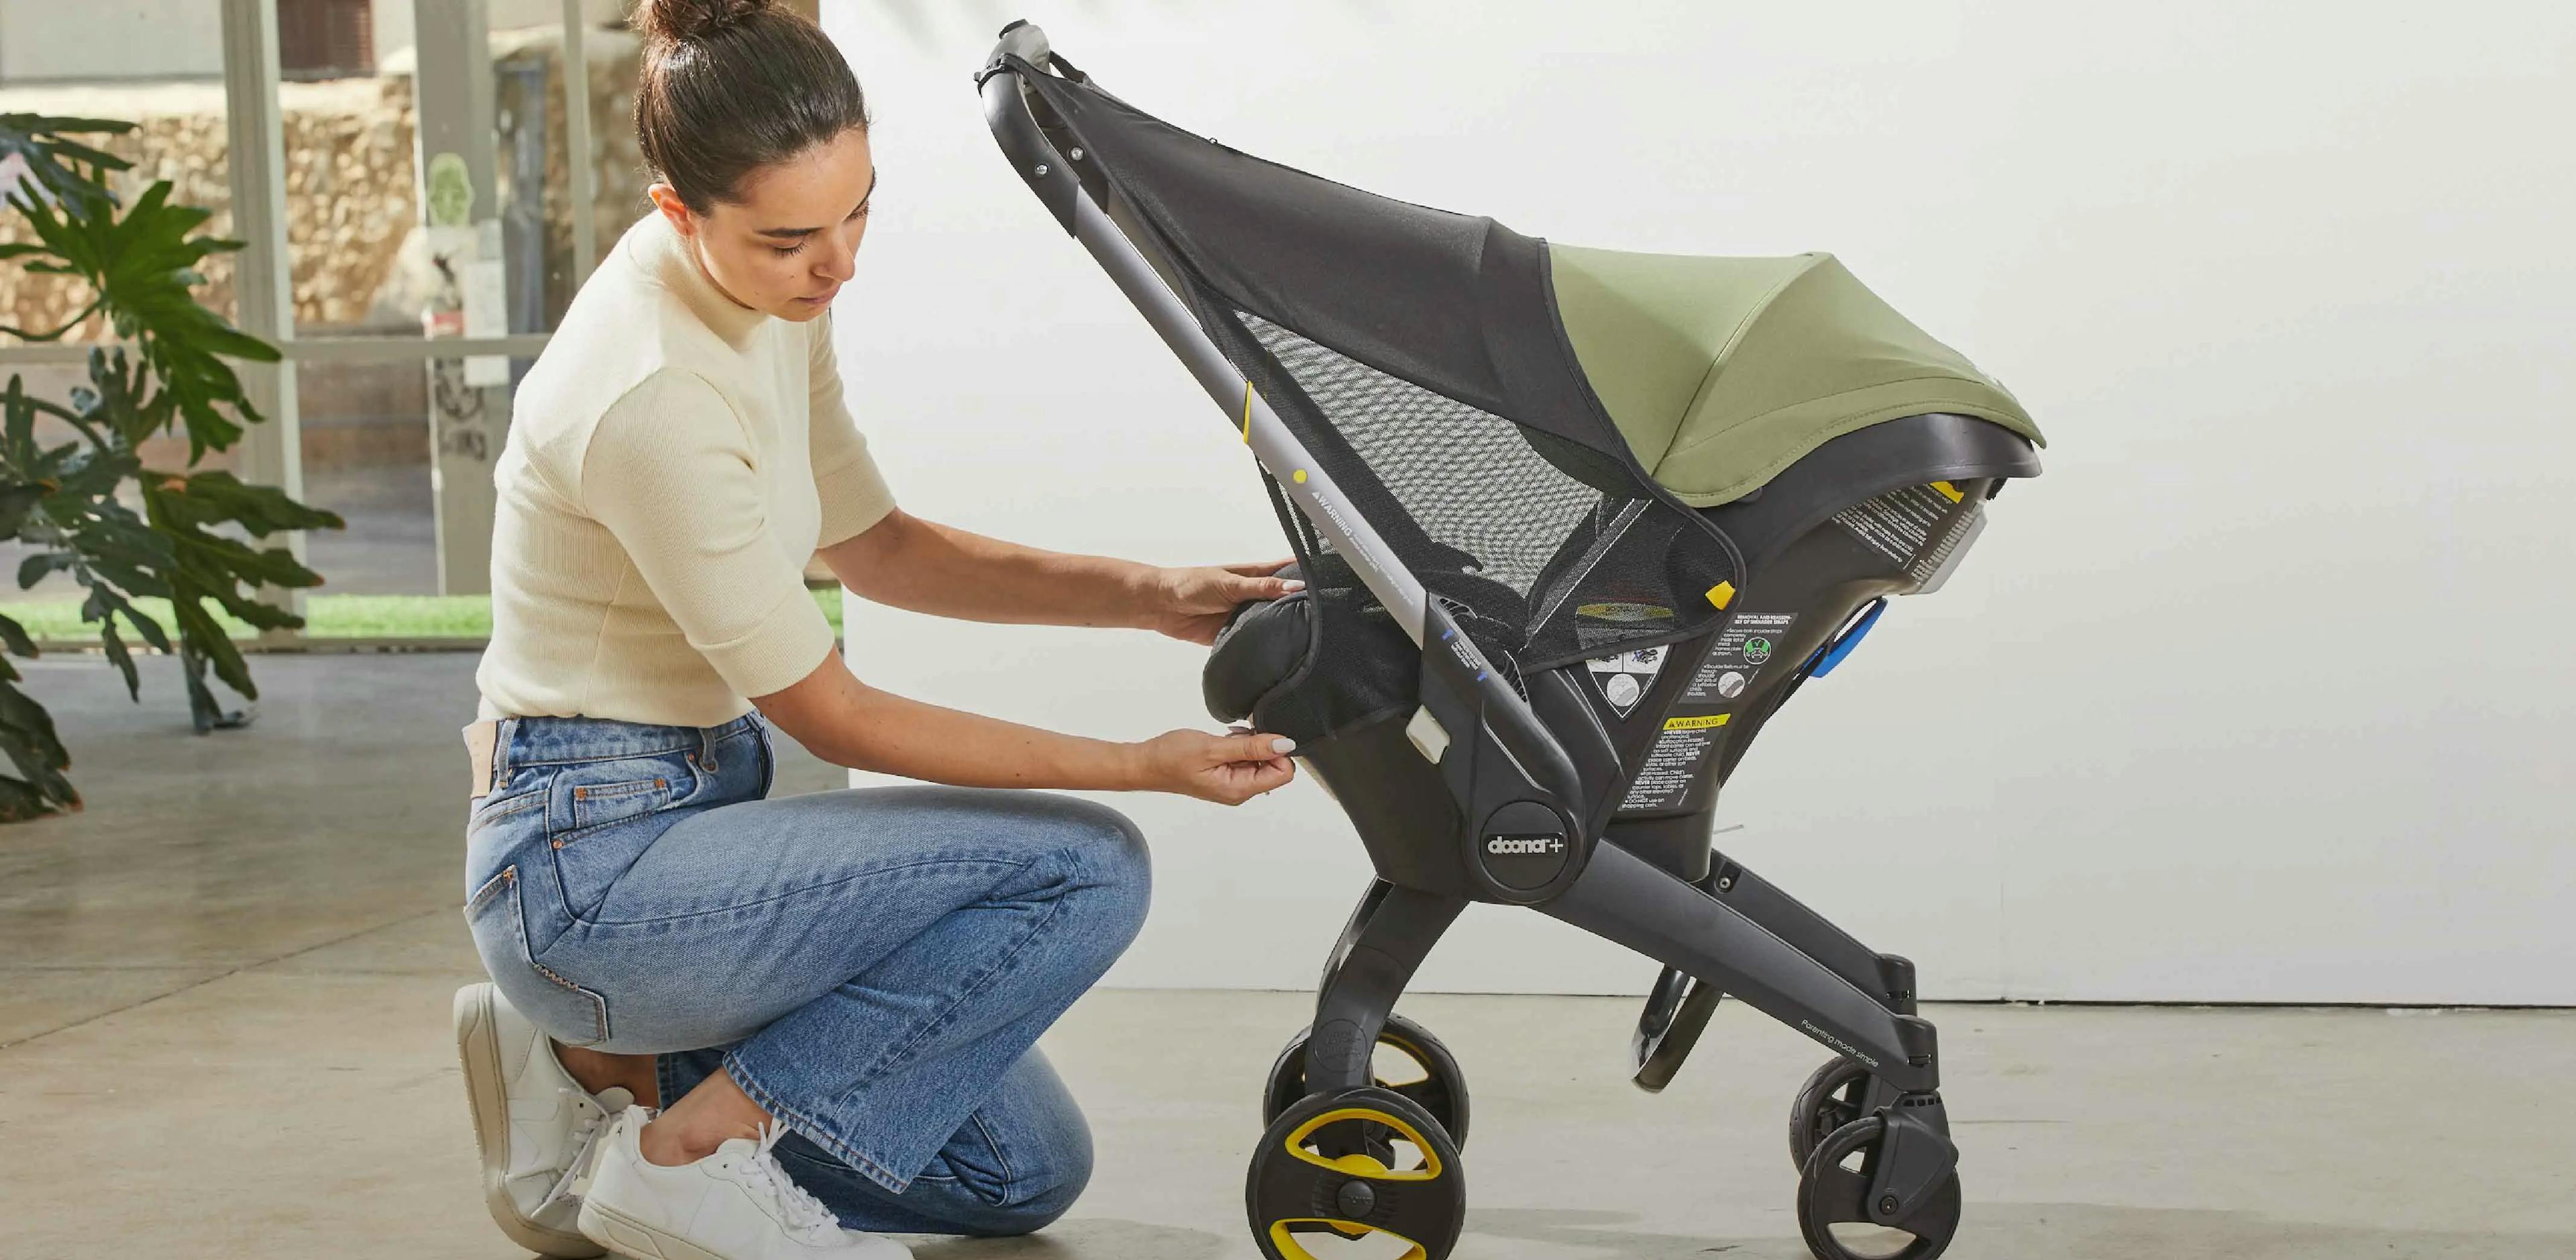 Stay cool this summer with Doona Car Seat & Stroller essentials 